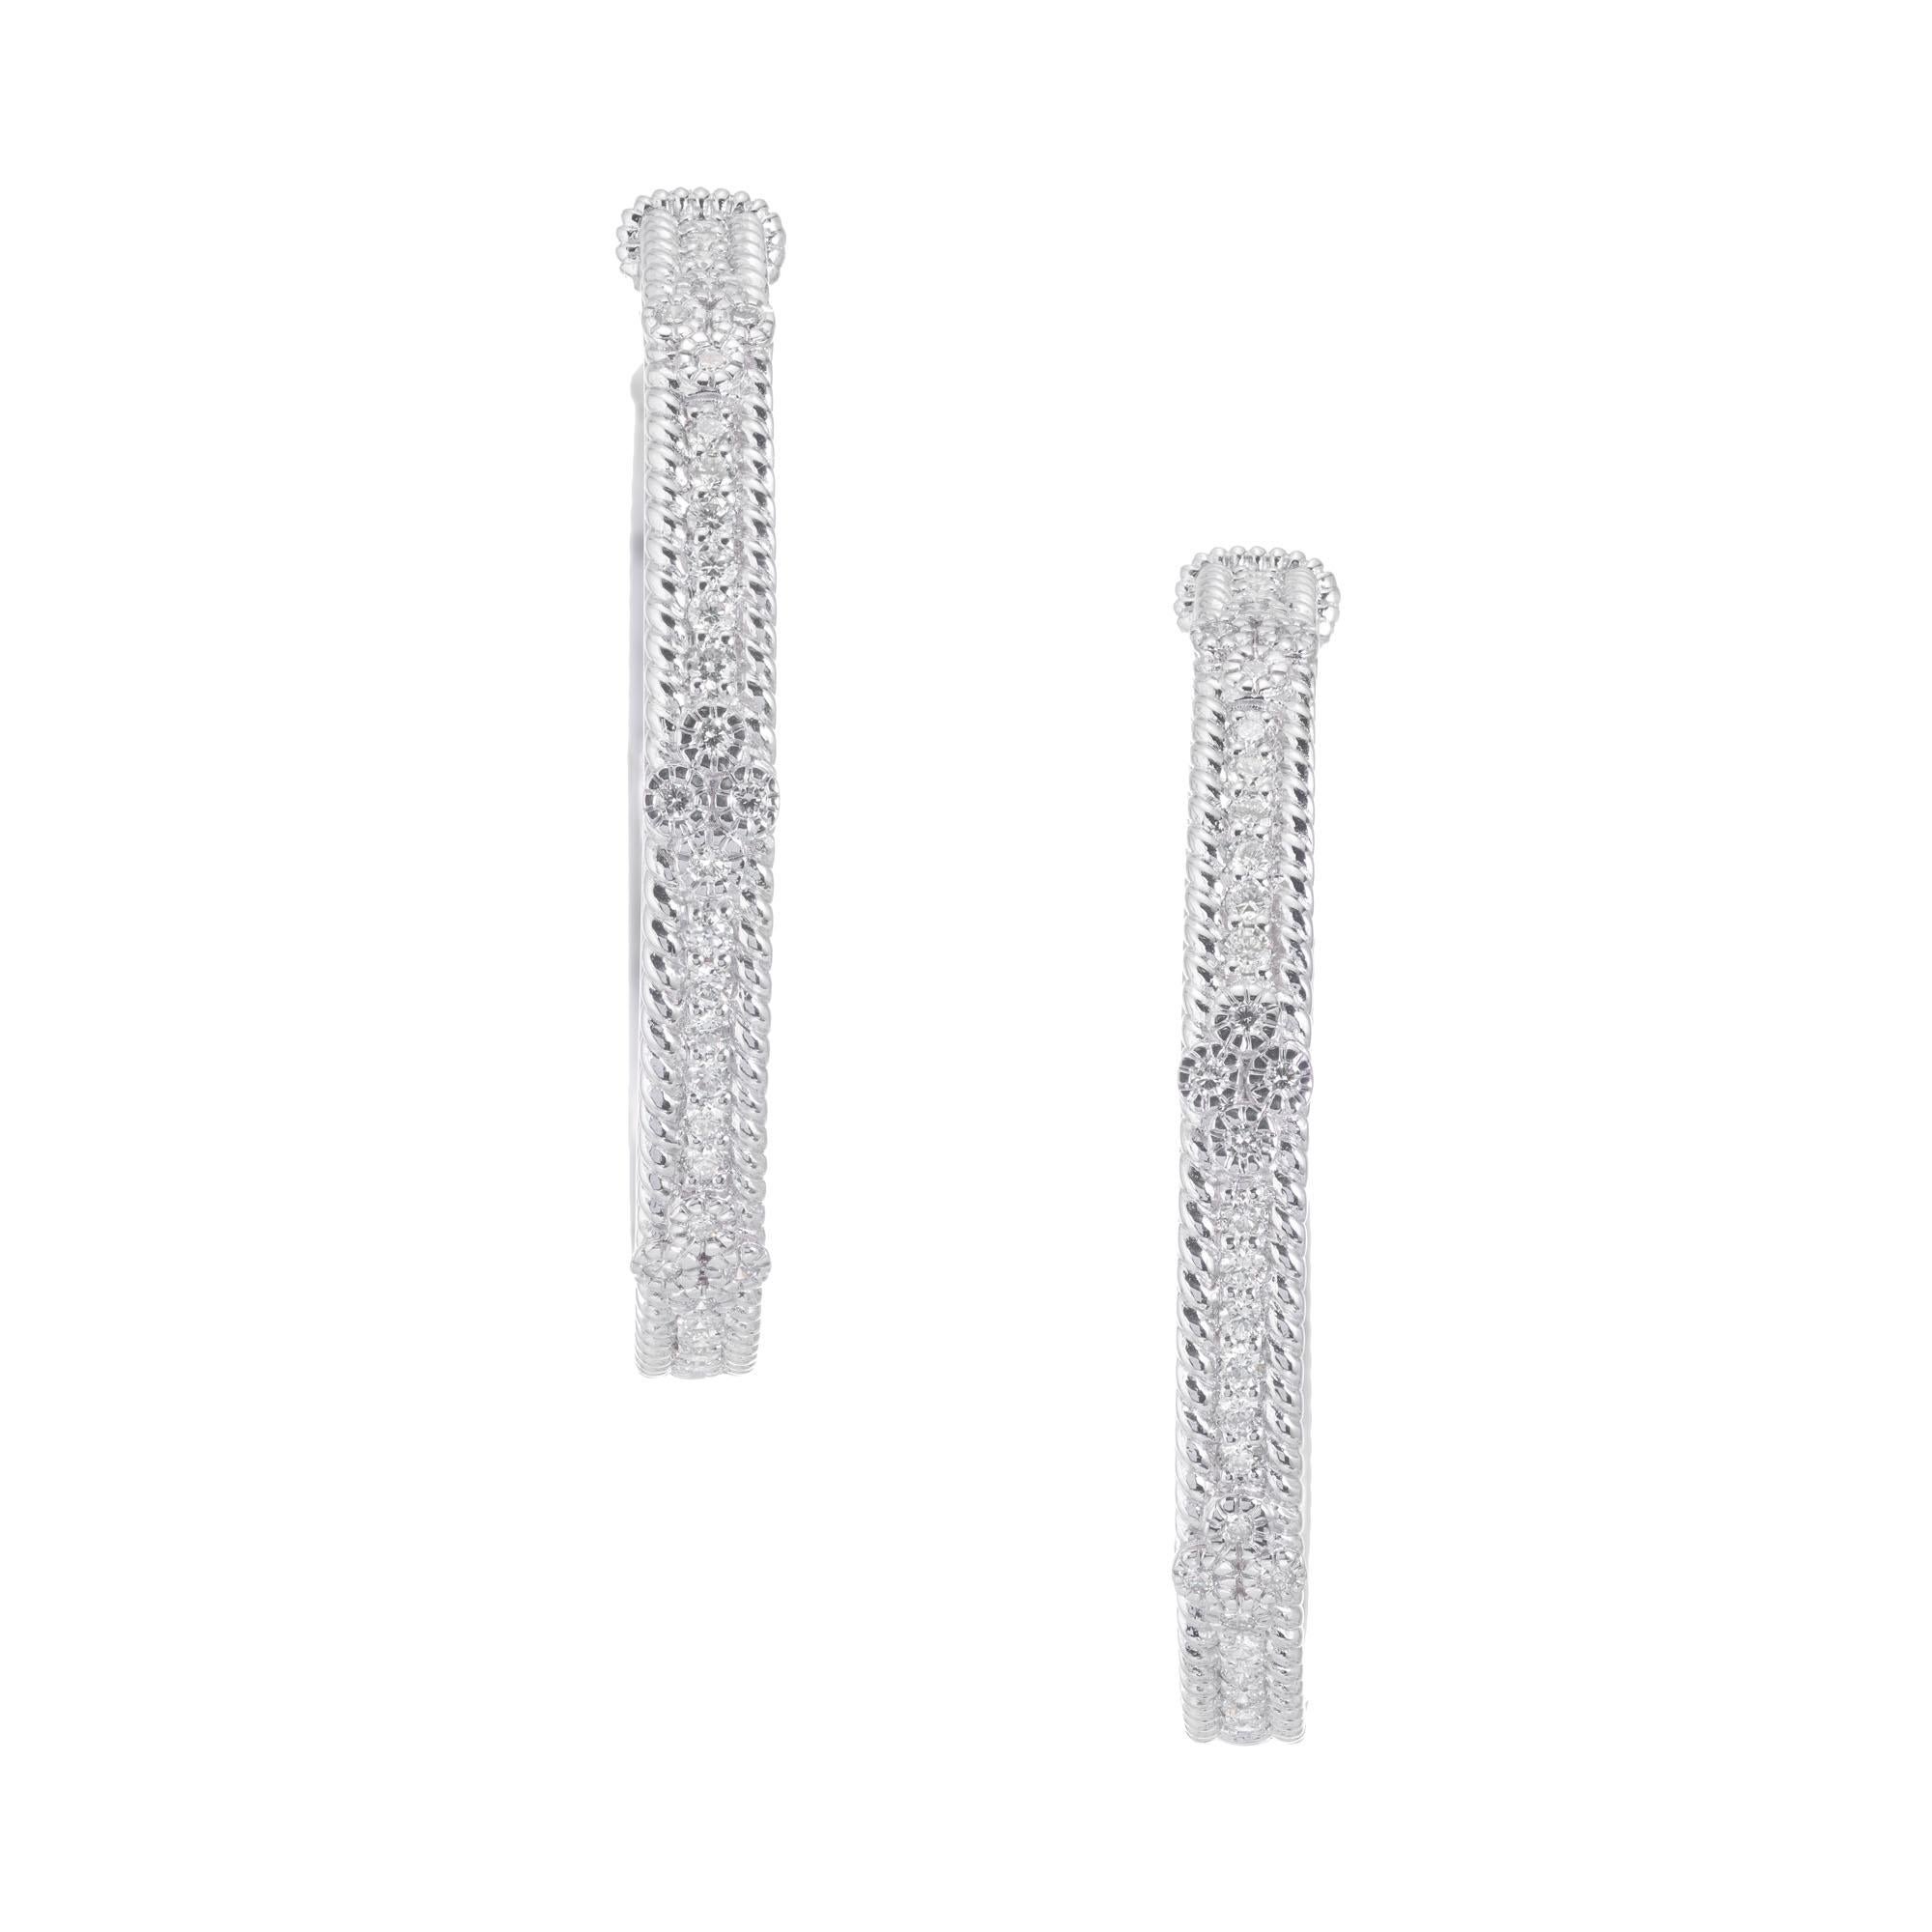 18k white gold Judith Ripka diamond hoop earrings with 24 round brilliant cut accent earrings.  

24 round brilliant cut diamonds, approx. .72cts
18k white gold 
Stamped: 18k
Hallmark: Judith Ripka
18.7 grams
Top to bottom: 39.7mm or 1.5 Inch
Width: